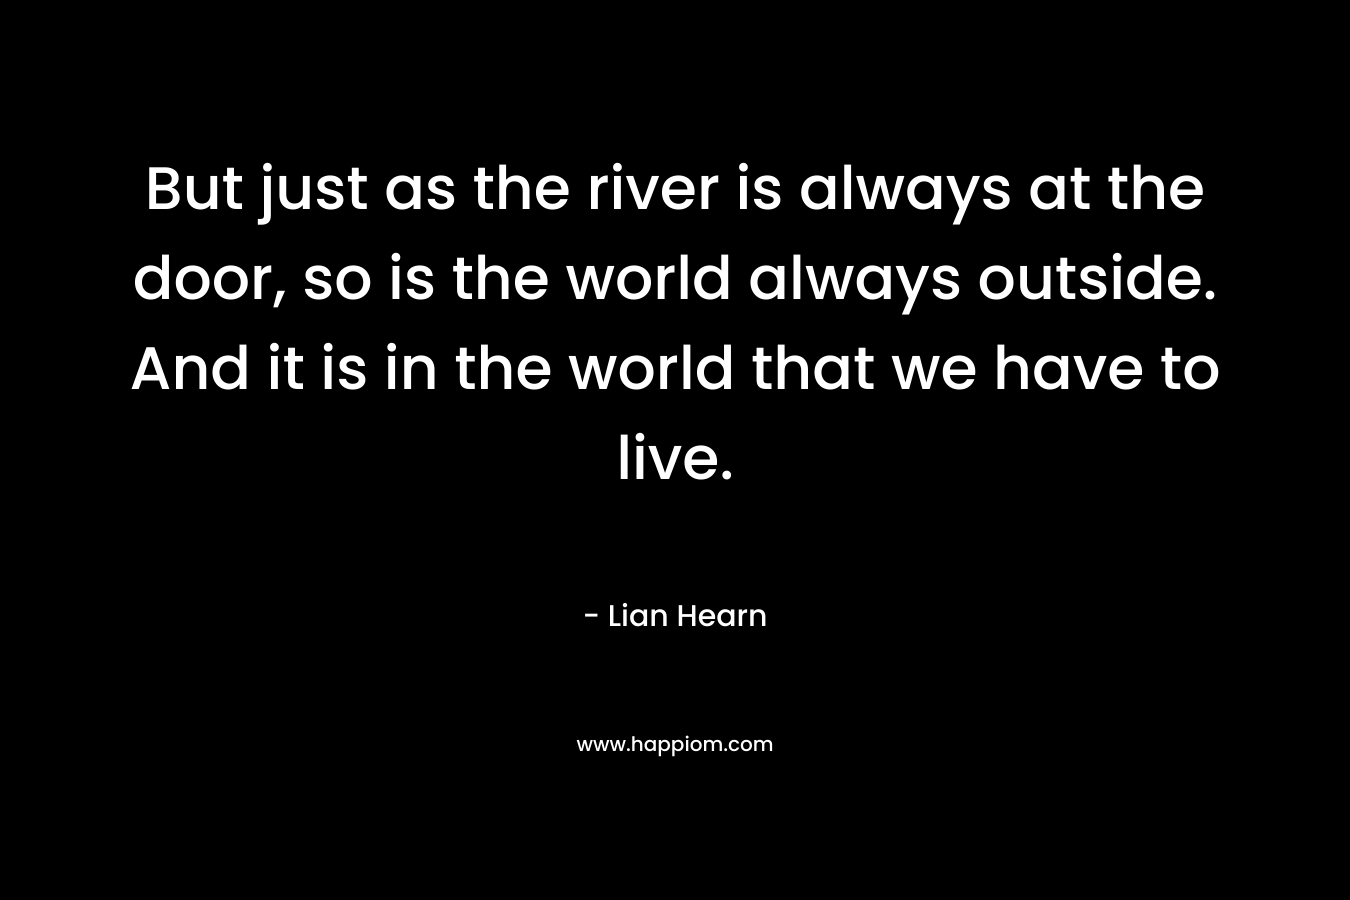 But just as the river is always at the door, so is the world always outside. And it is in the world that we have to live. – Lian Hearn